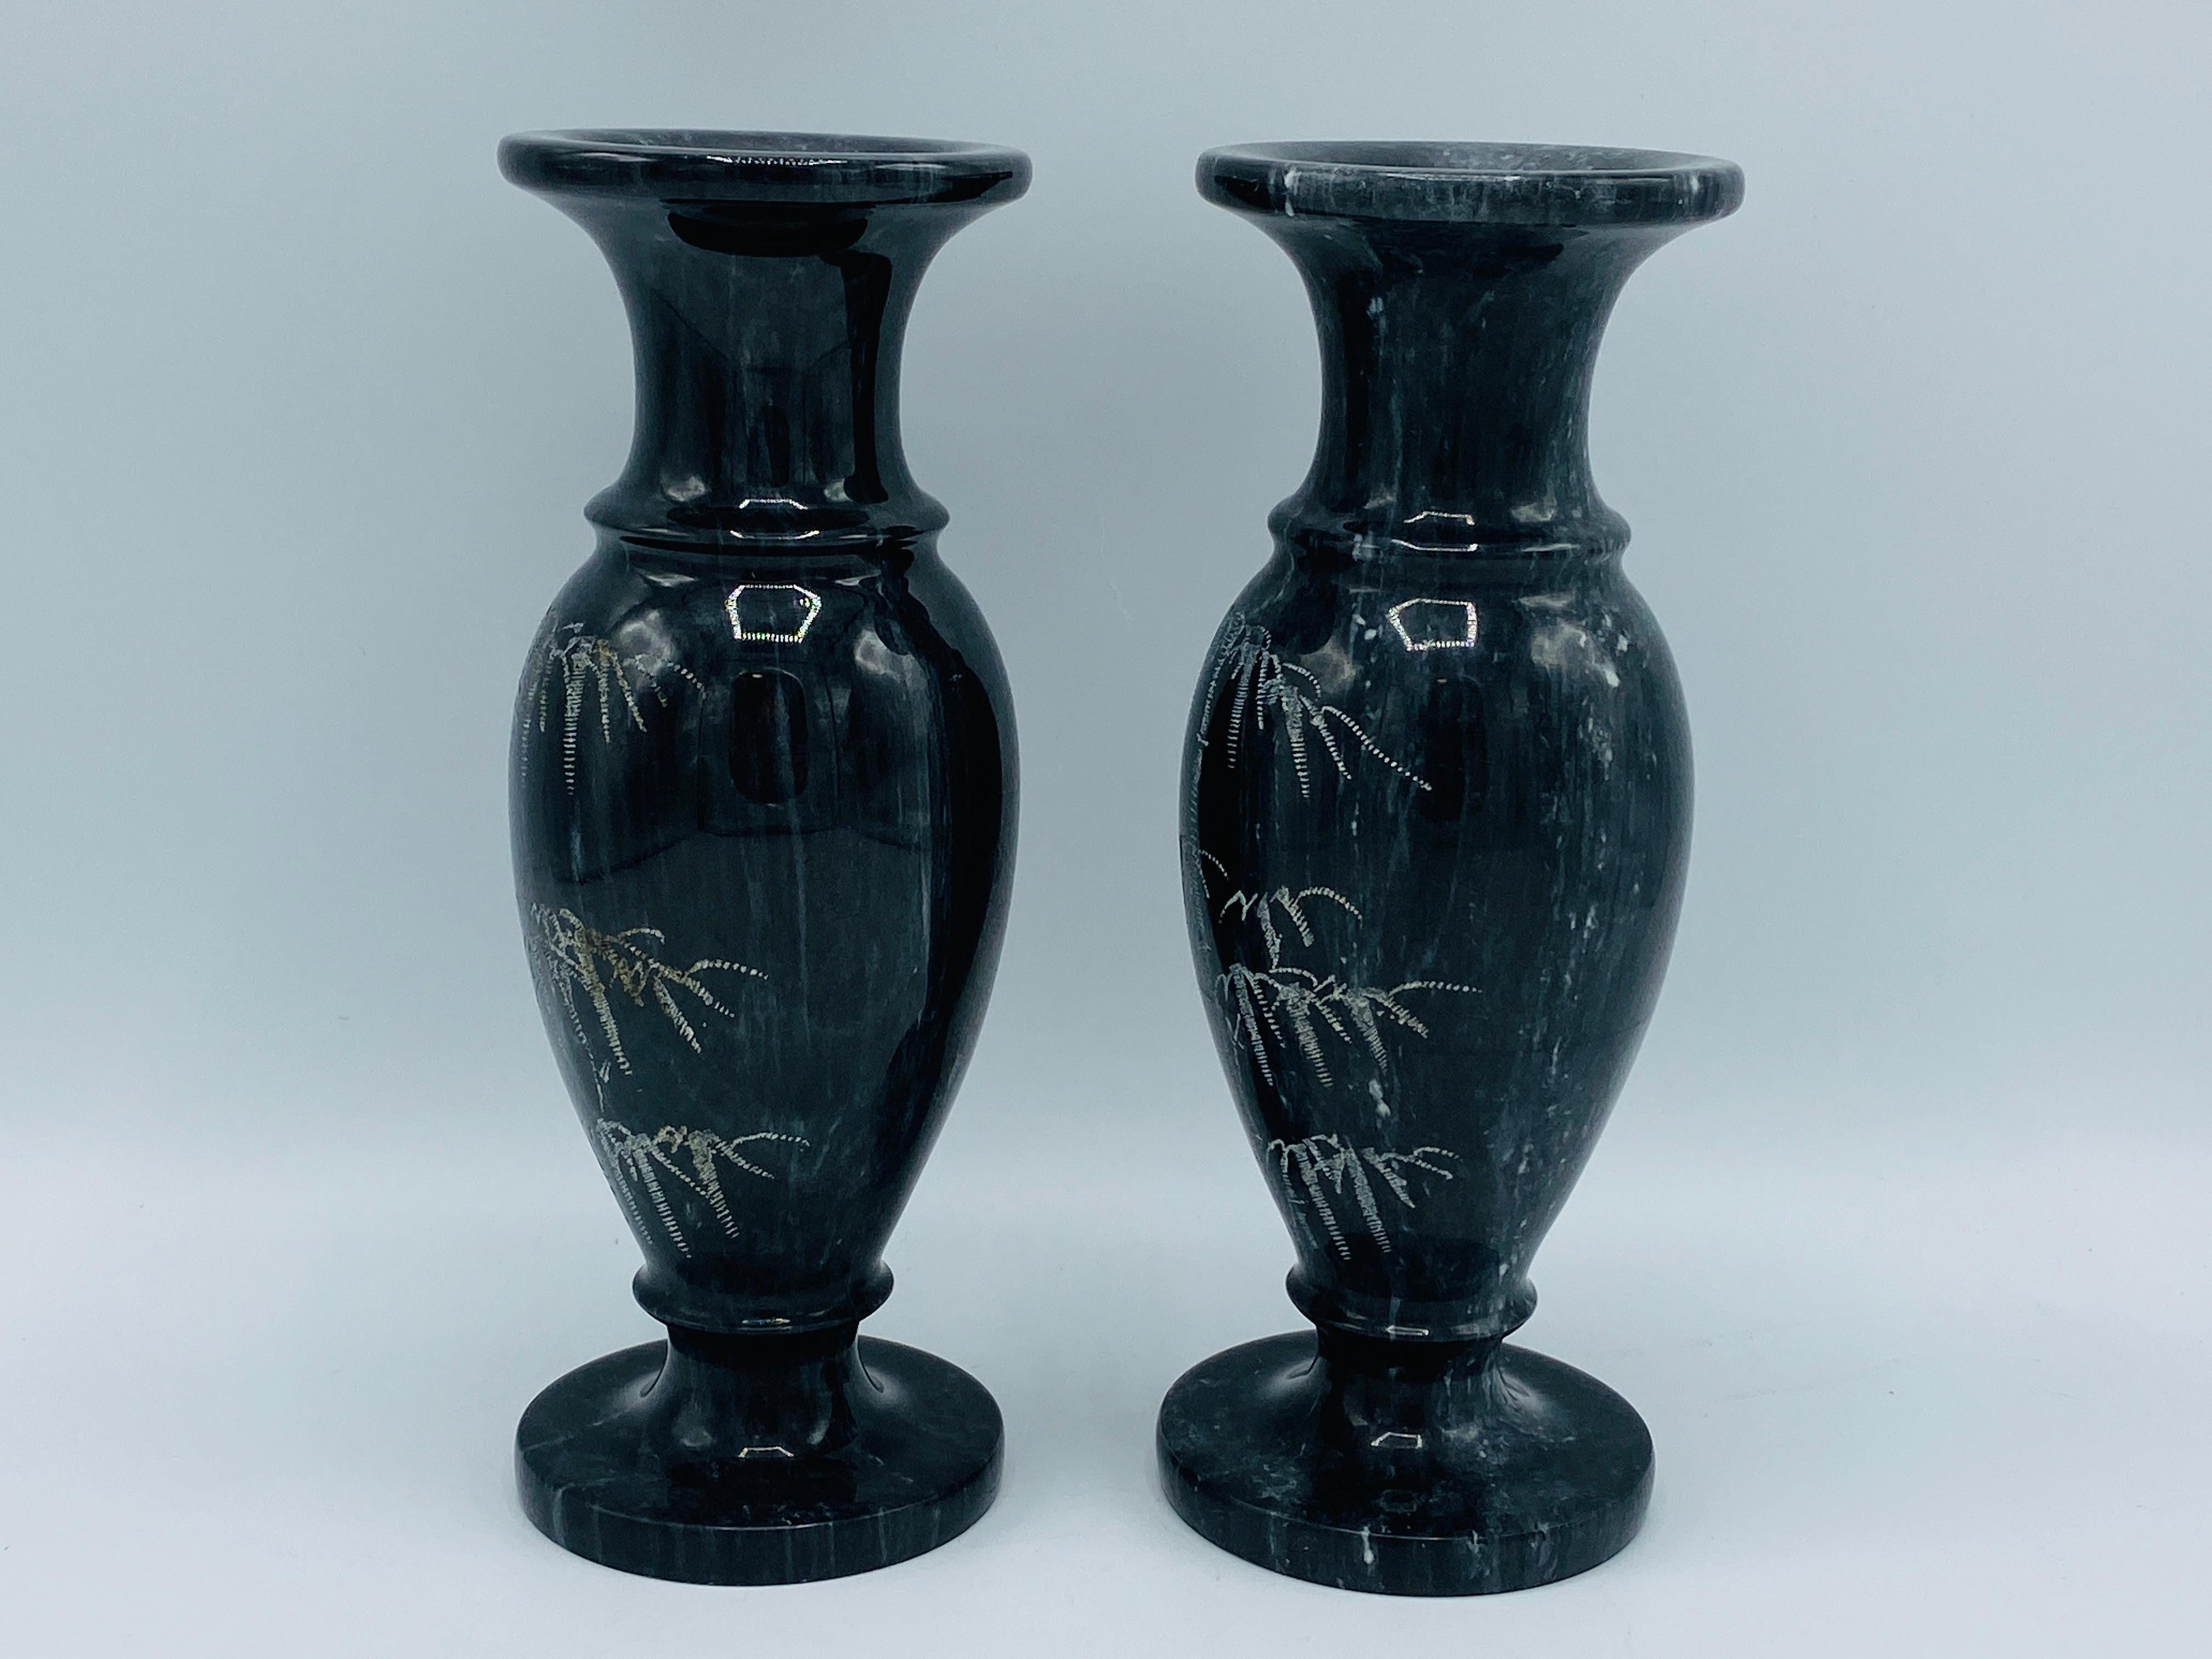 1960s Italian Marble Vases with Etched Bamboo Motif, Pair For Sale 1